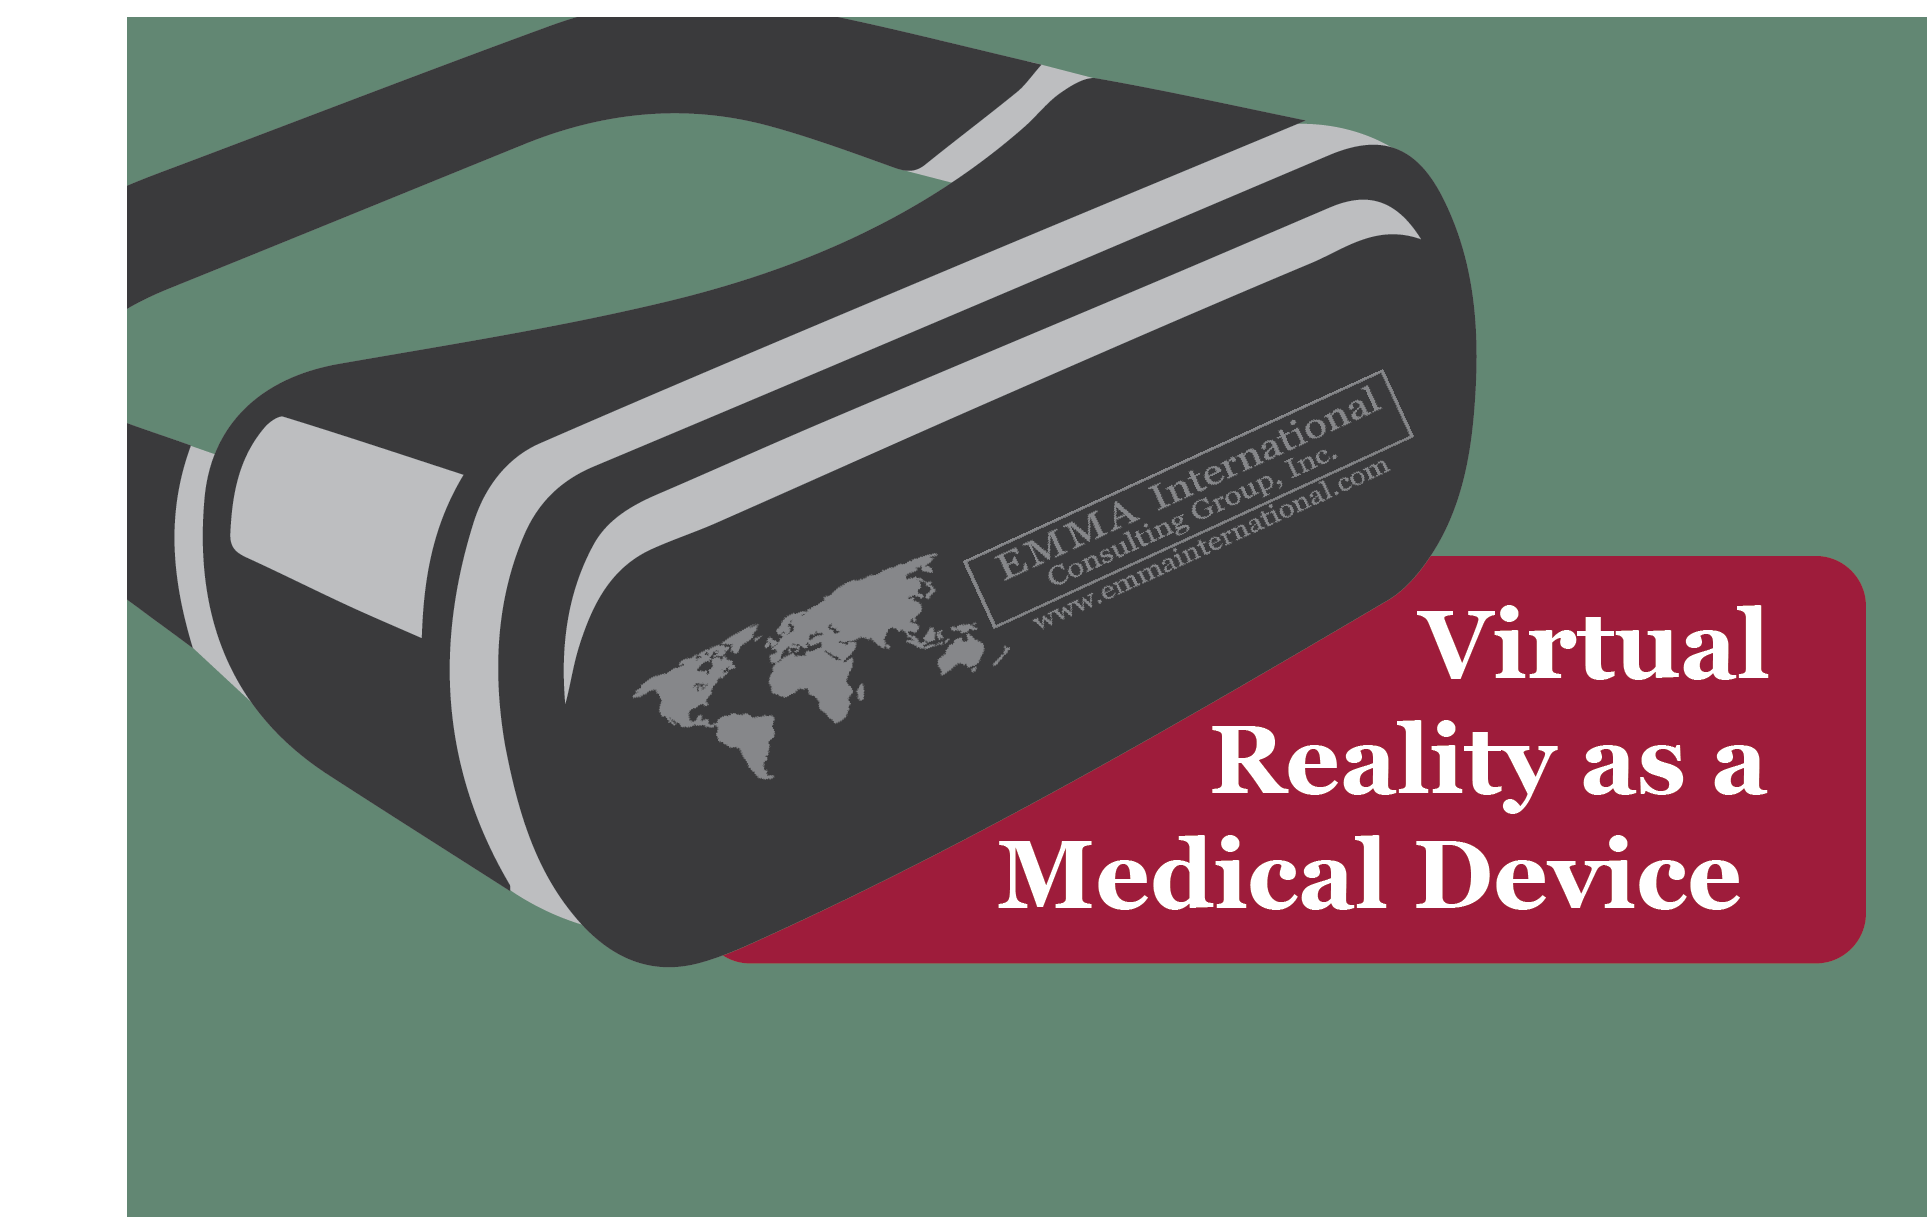 Virtual Reality as a Medical Device